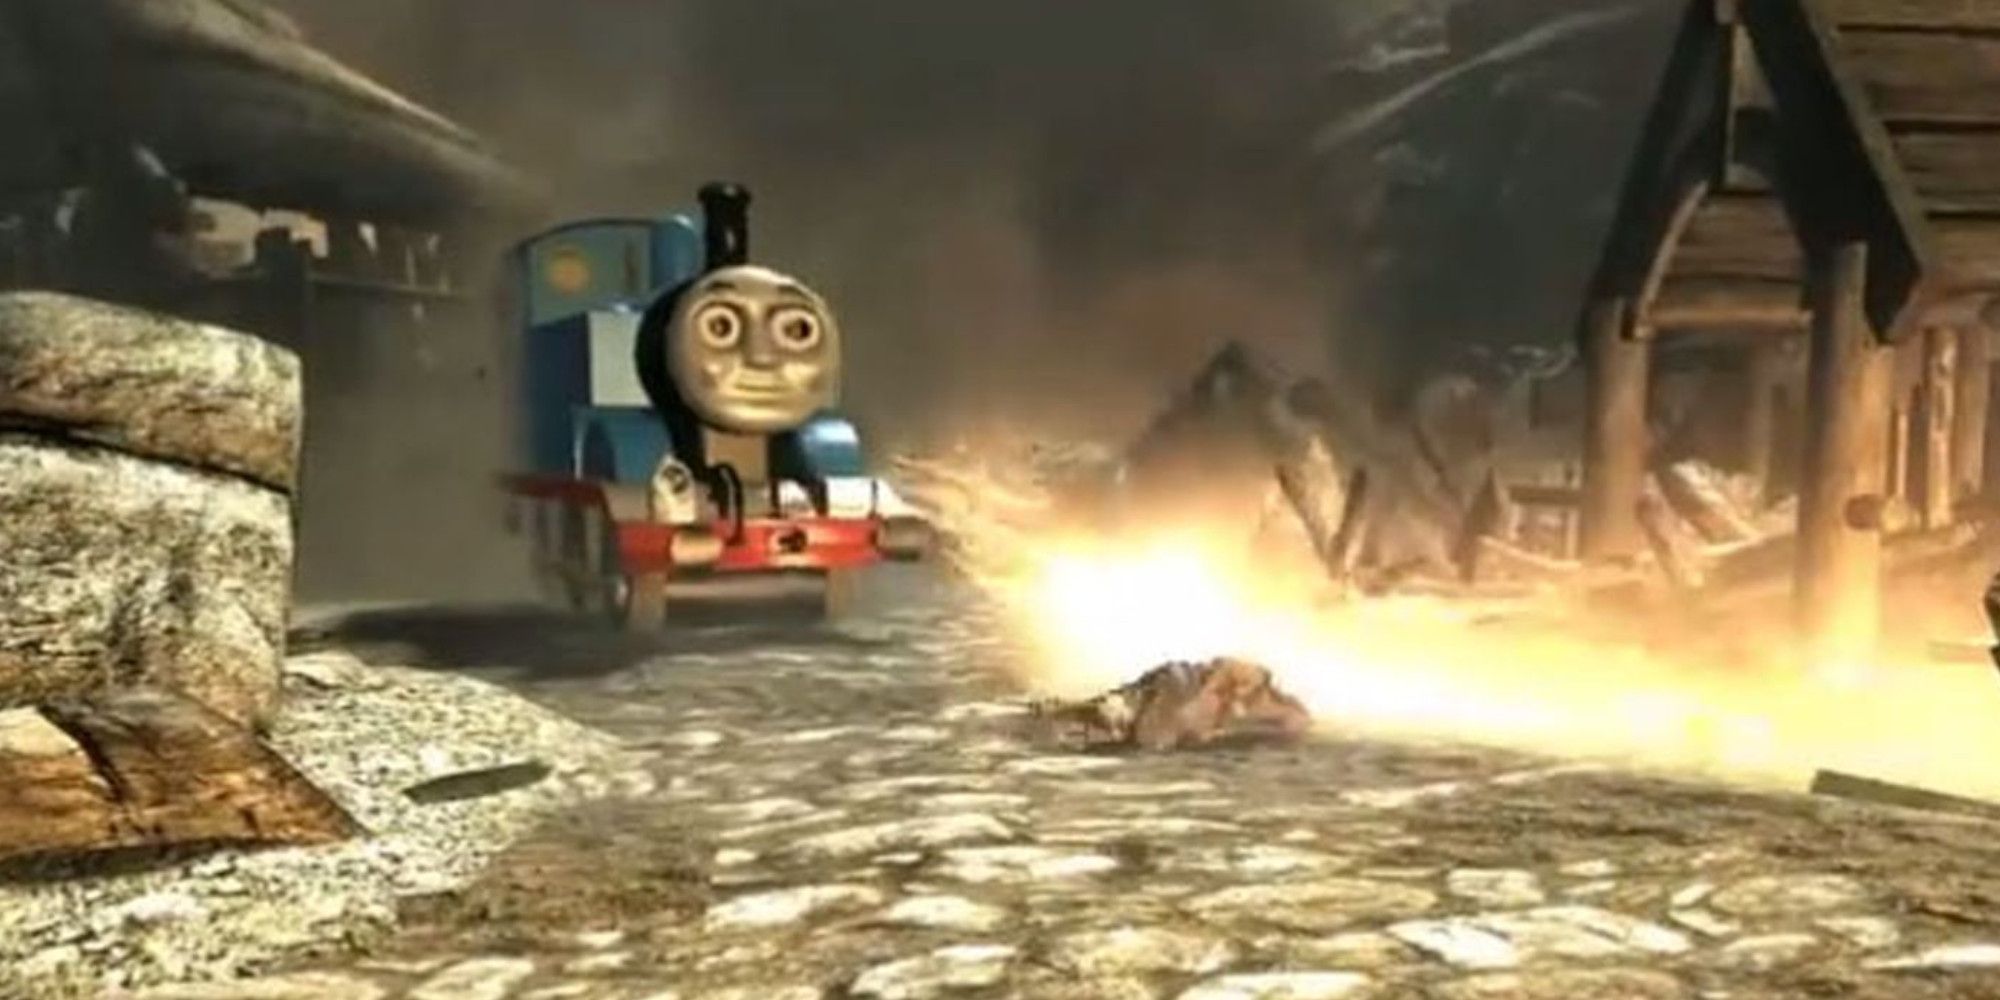 skyrim thomas the tank engine mod that replaces dragons with thomas. He's breathing fire on helgen with wide, lifeless eyes